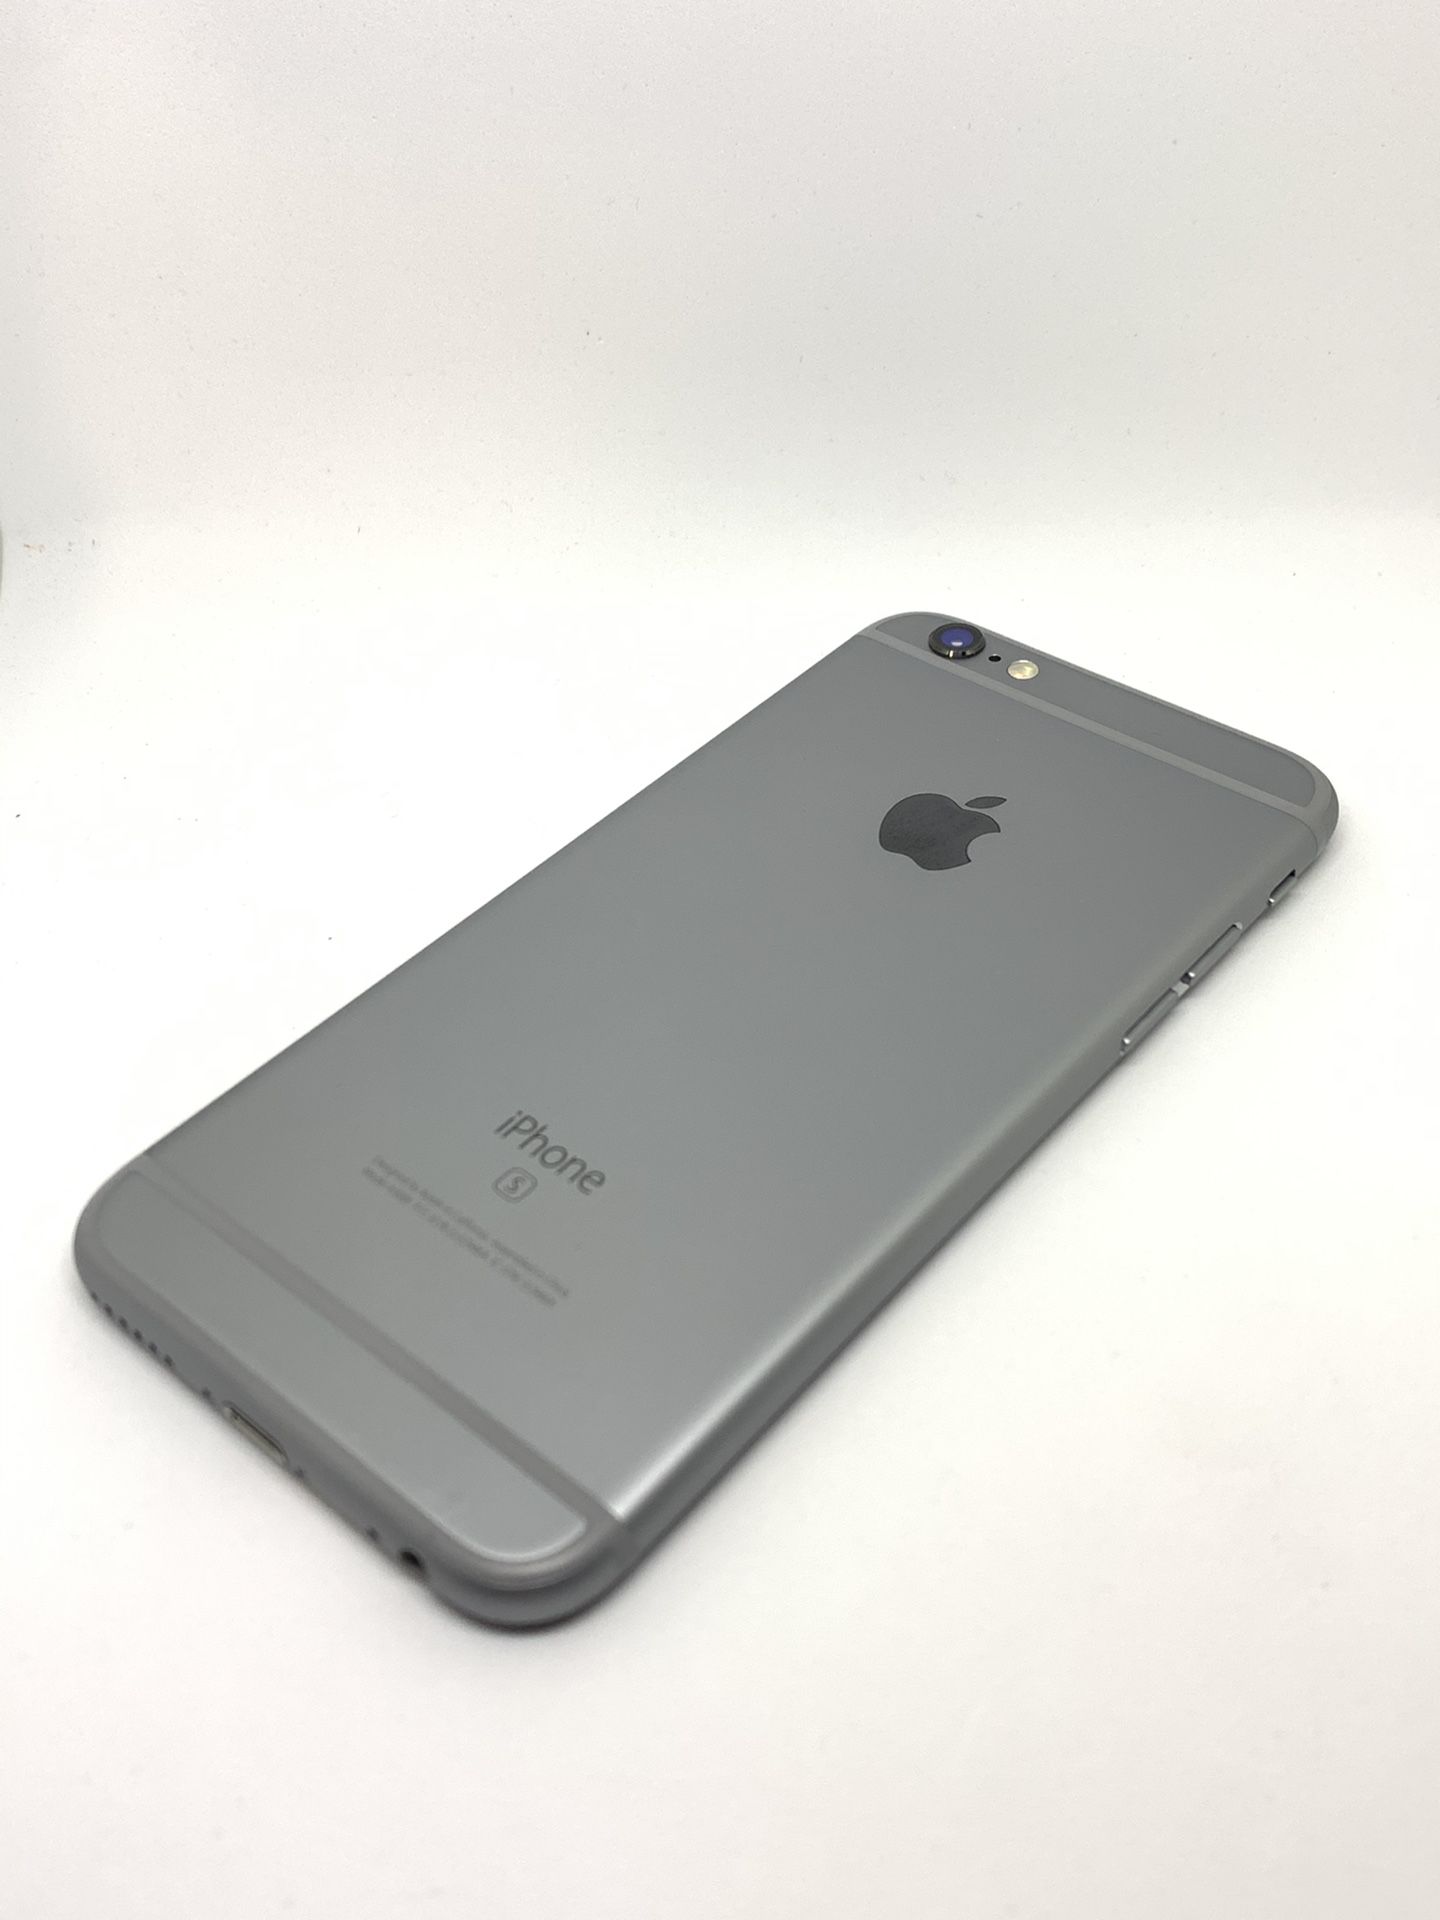 Apple iPhone 6s - 32GB - Space Gray -Sprint- Mint condition